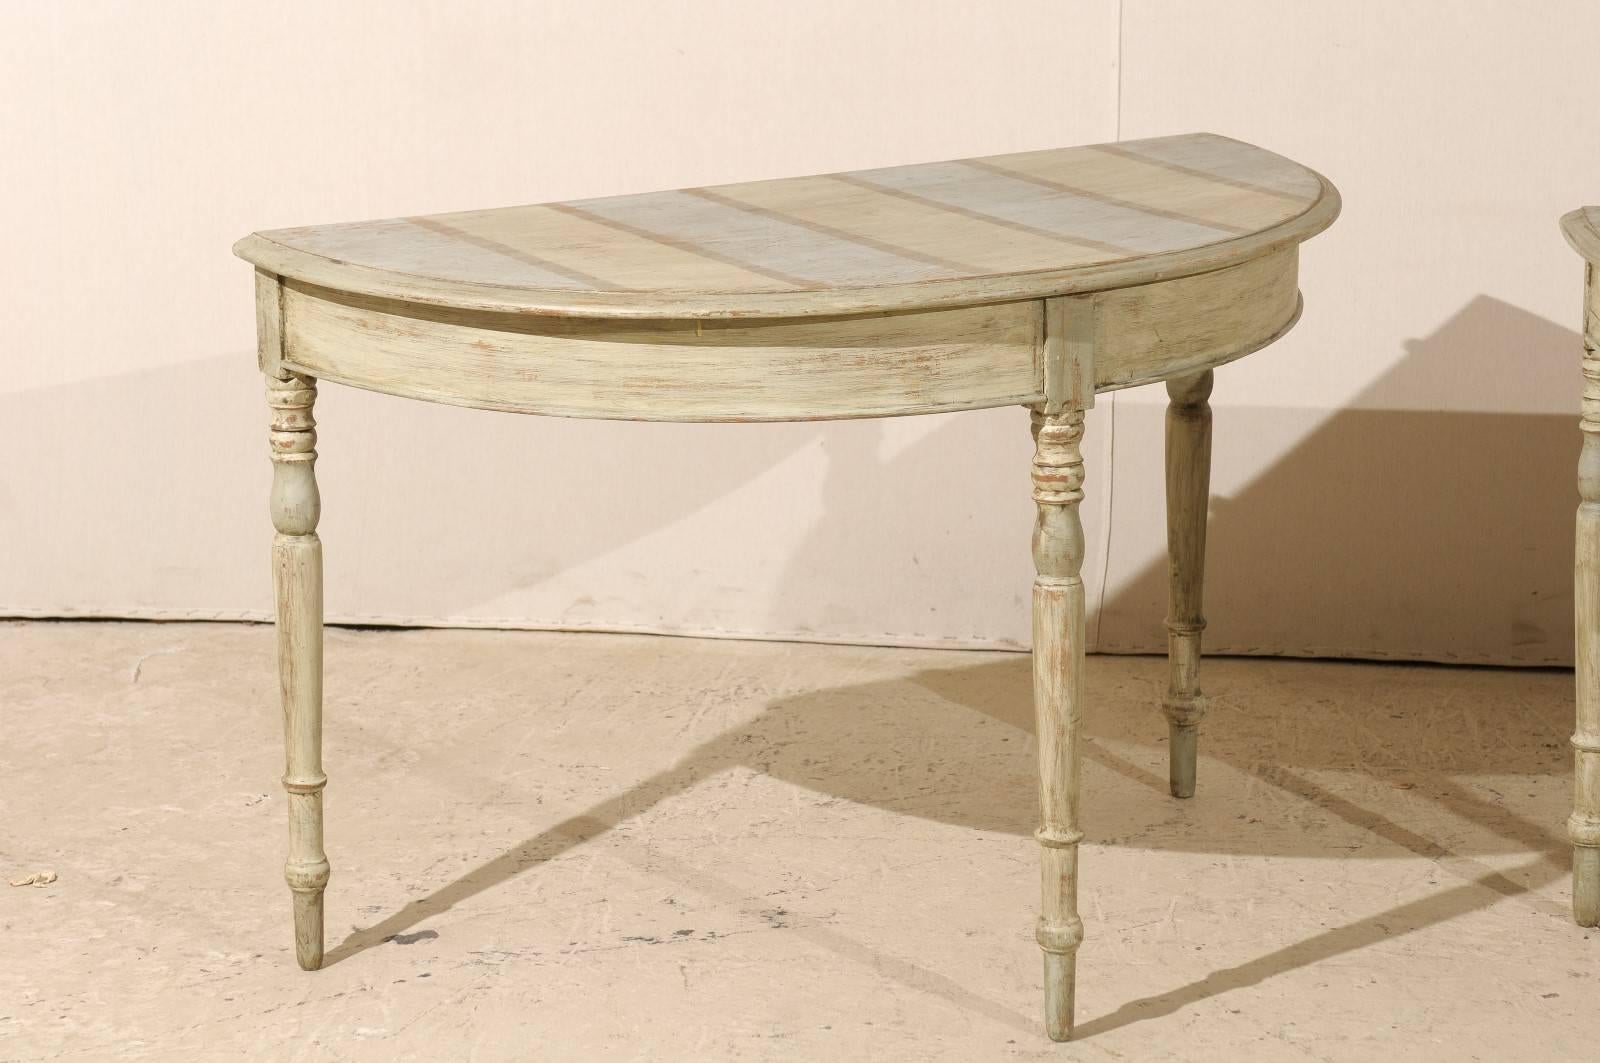 Pair of Swedish Blue or Grey Demilune Console Tables from the 19th Century 1